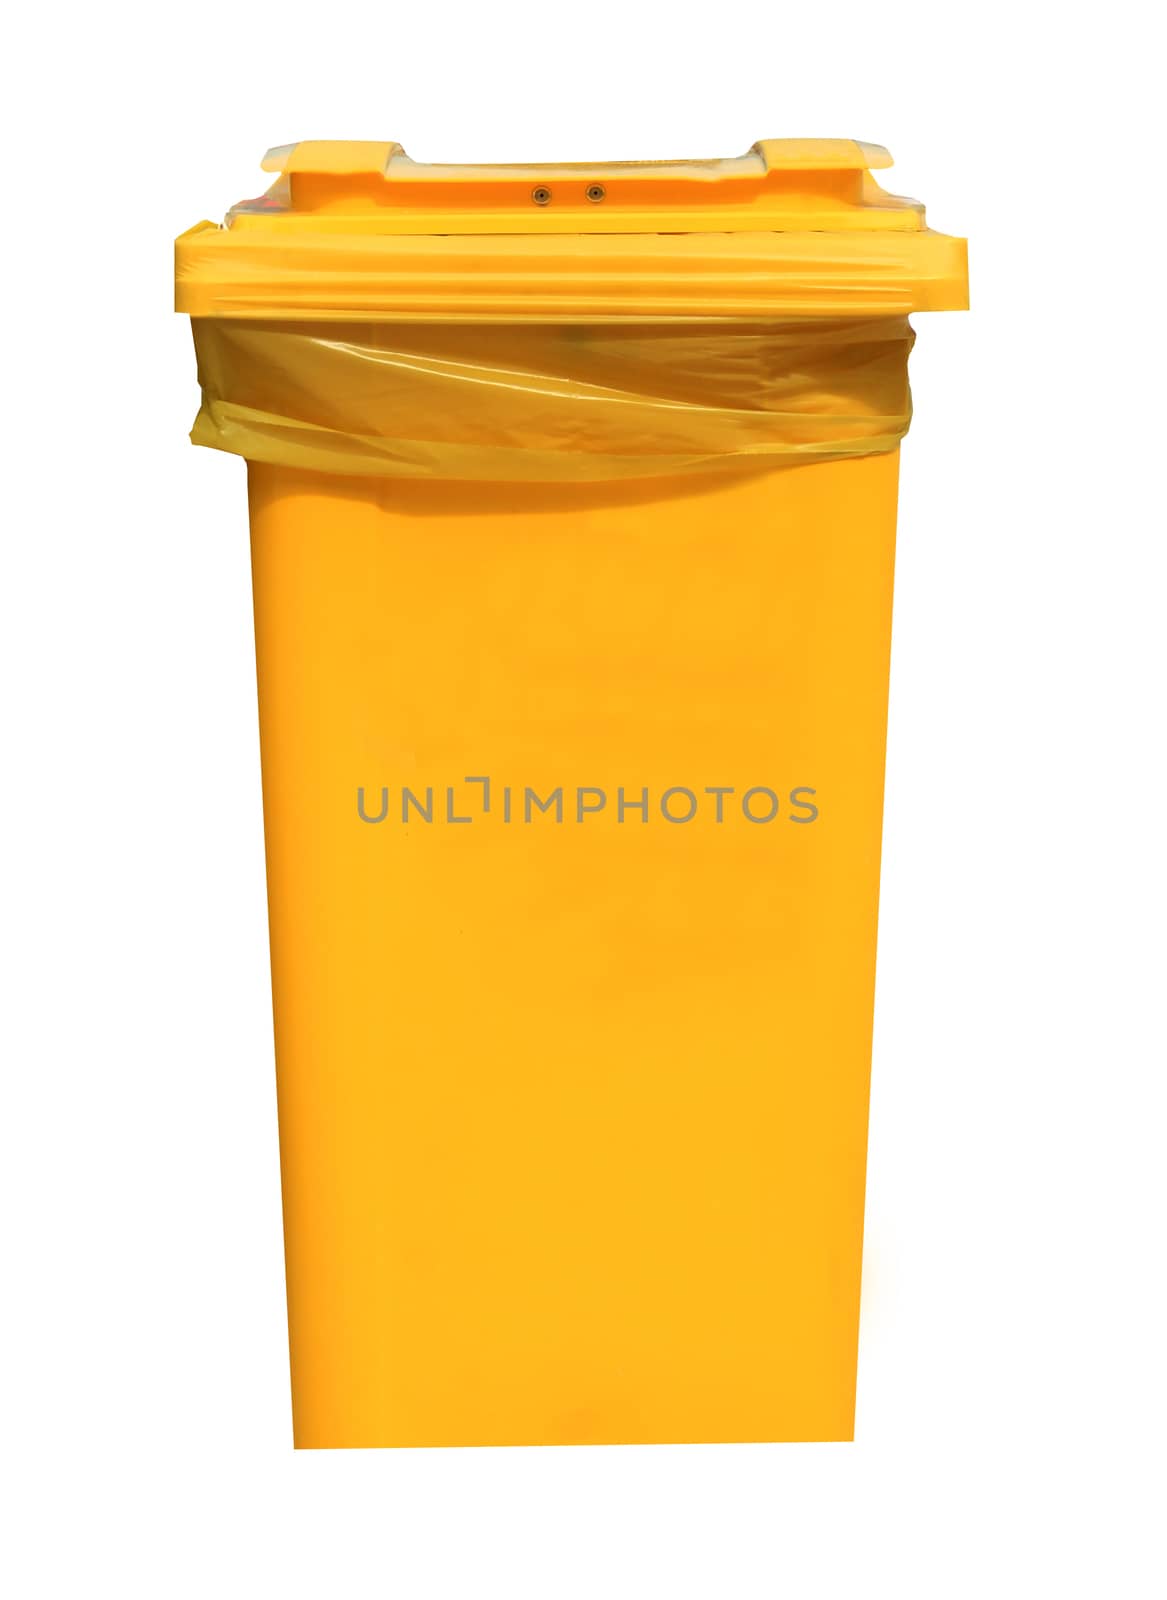 Yellow recycling bin isolated on a white background.